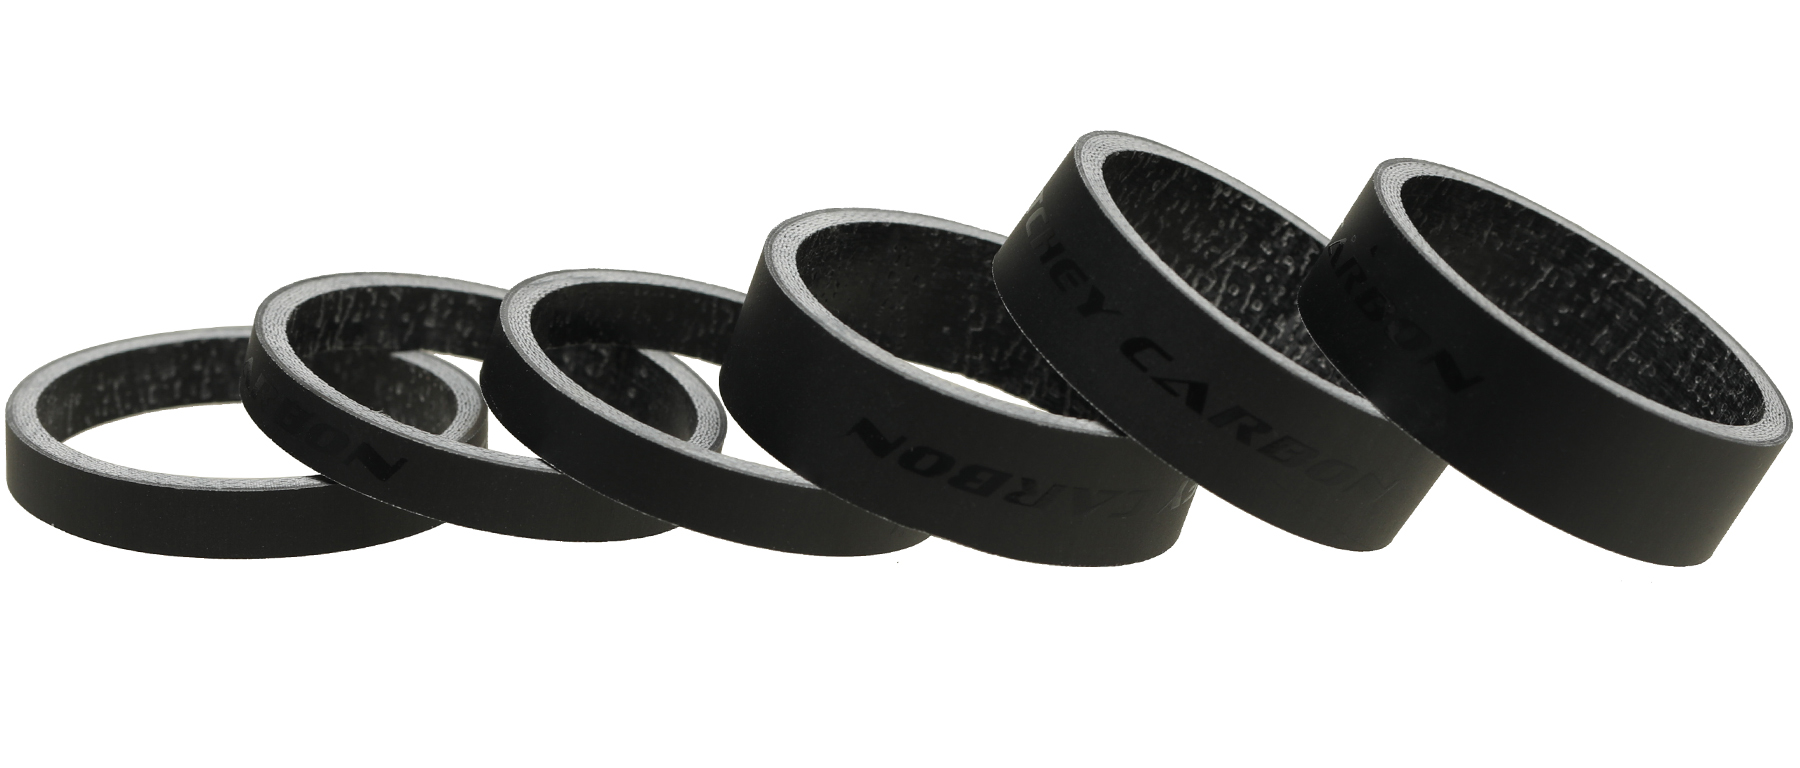 Ritchey WCS Carbon Headset Spacers